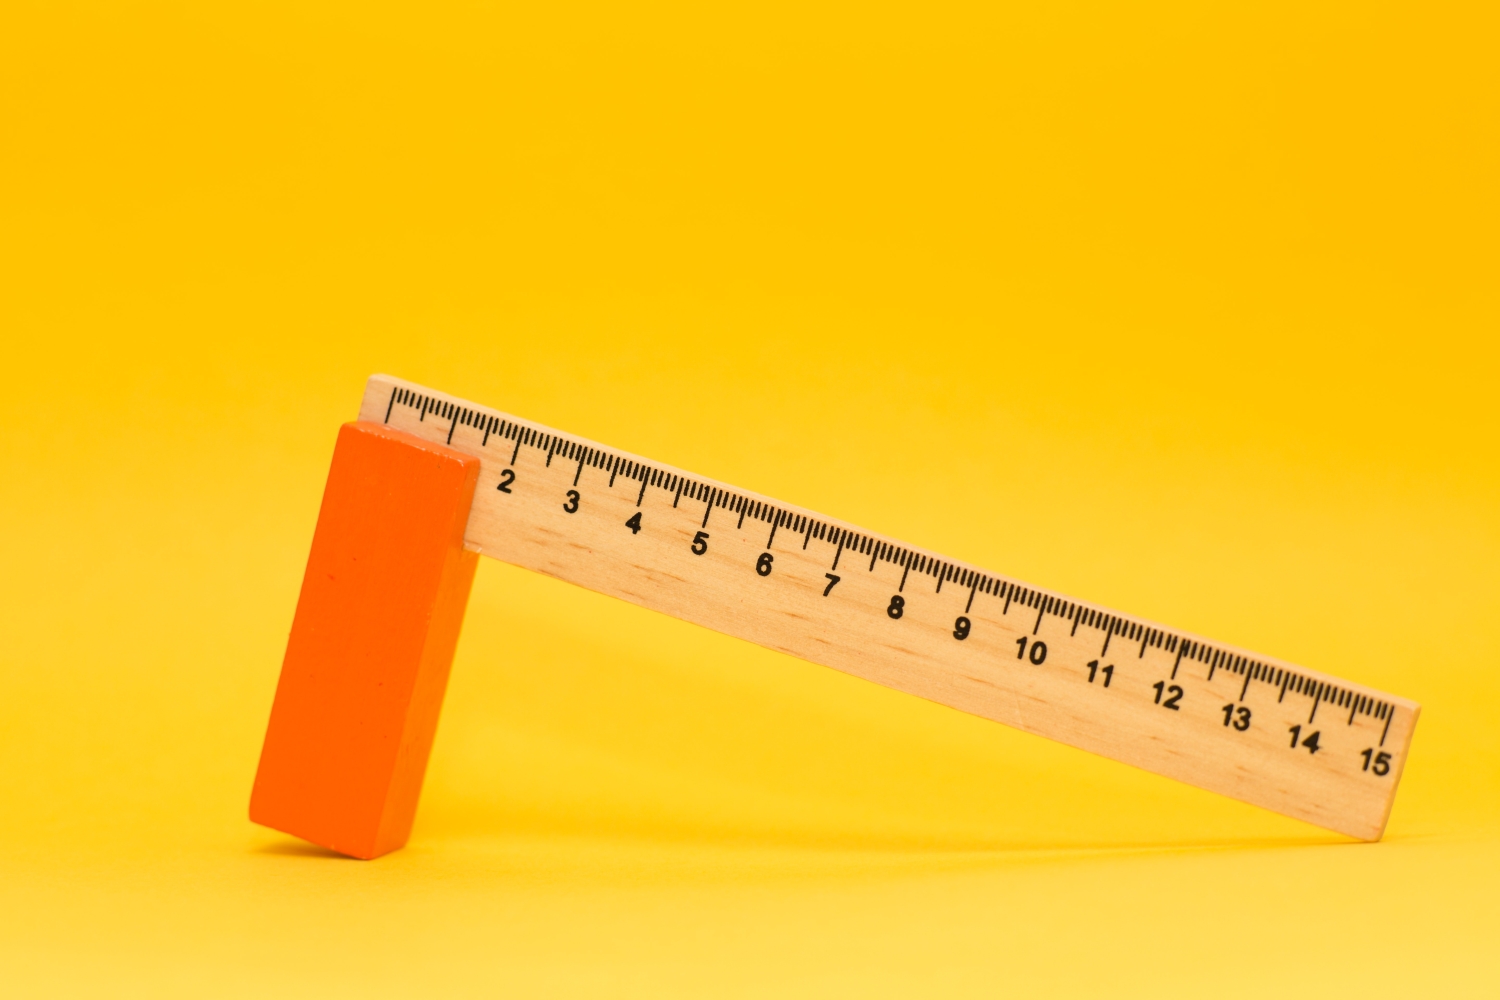 Ruler propped up against a yellow background.